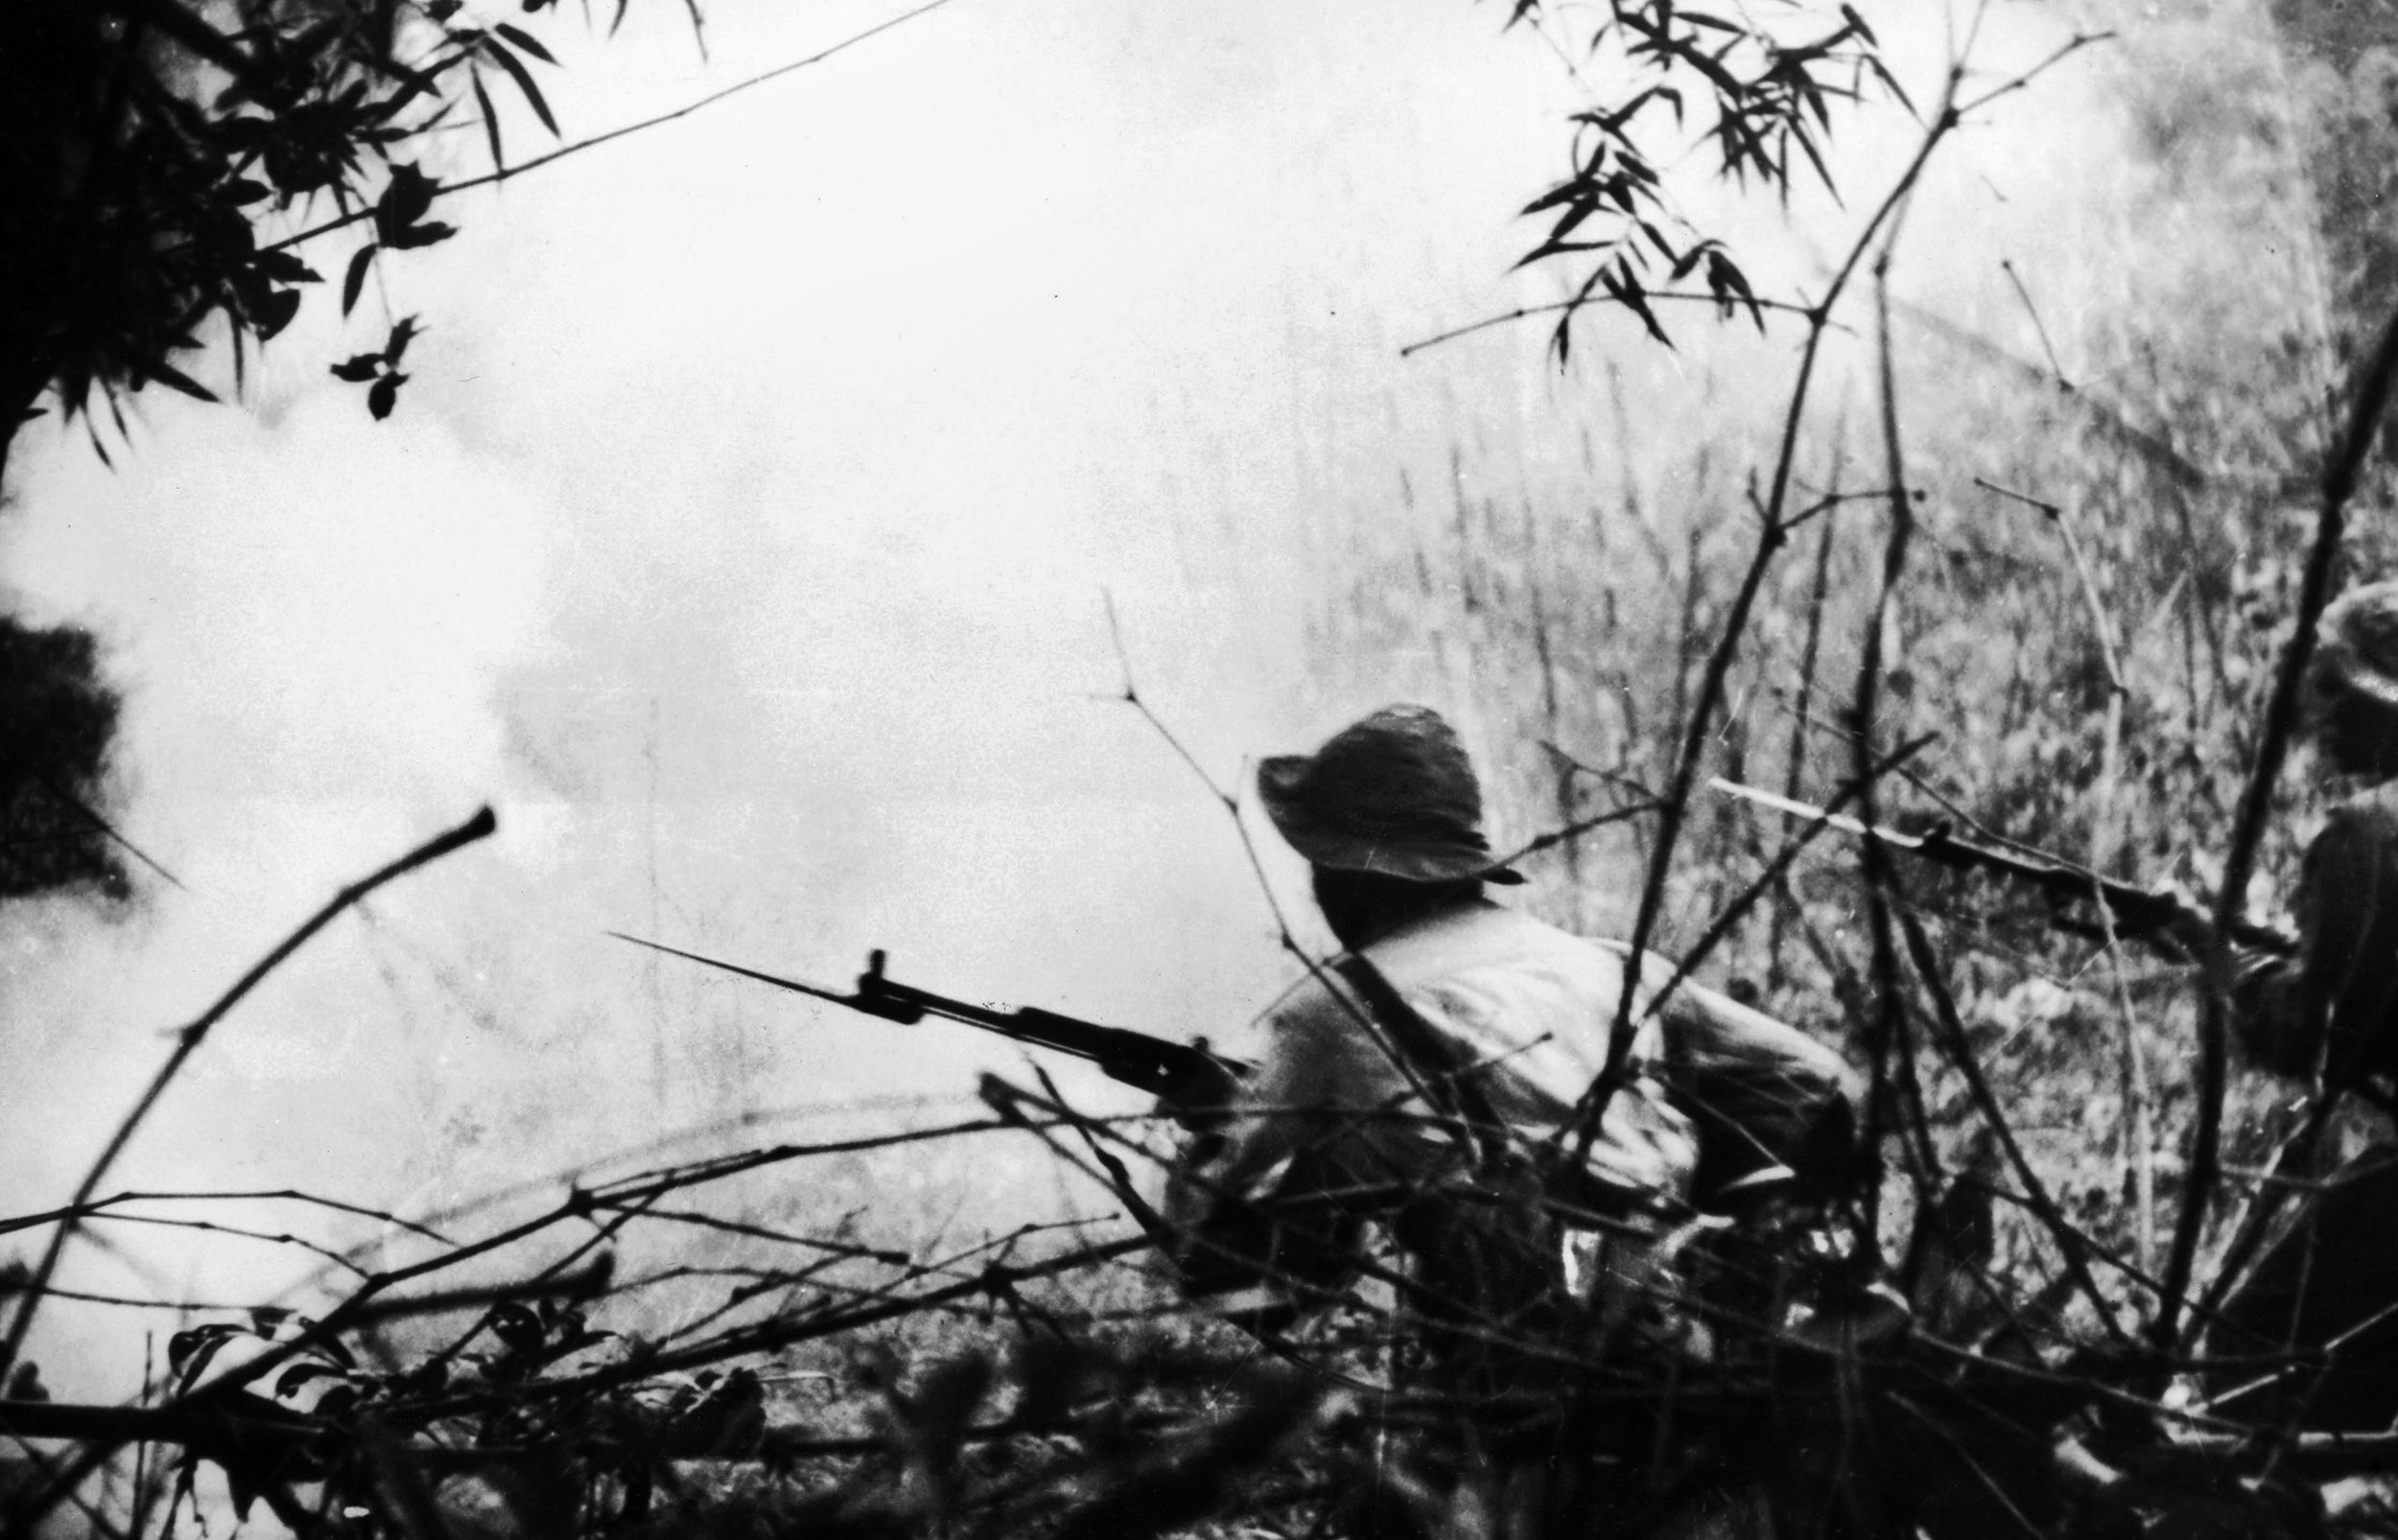 Viet Cong troops attack the city of Hue, Vietnam in early 1968. They had been stockpiling arms and other supplies months before the planned Tet Offensive, believing the civilian population of the city would rise up and join the fight.